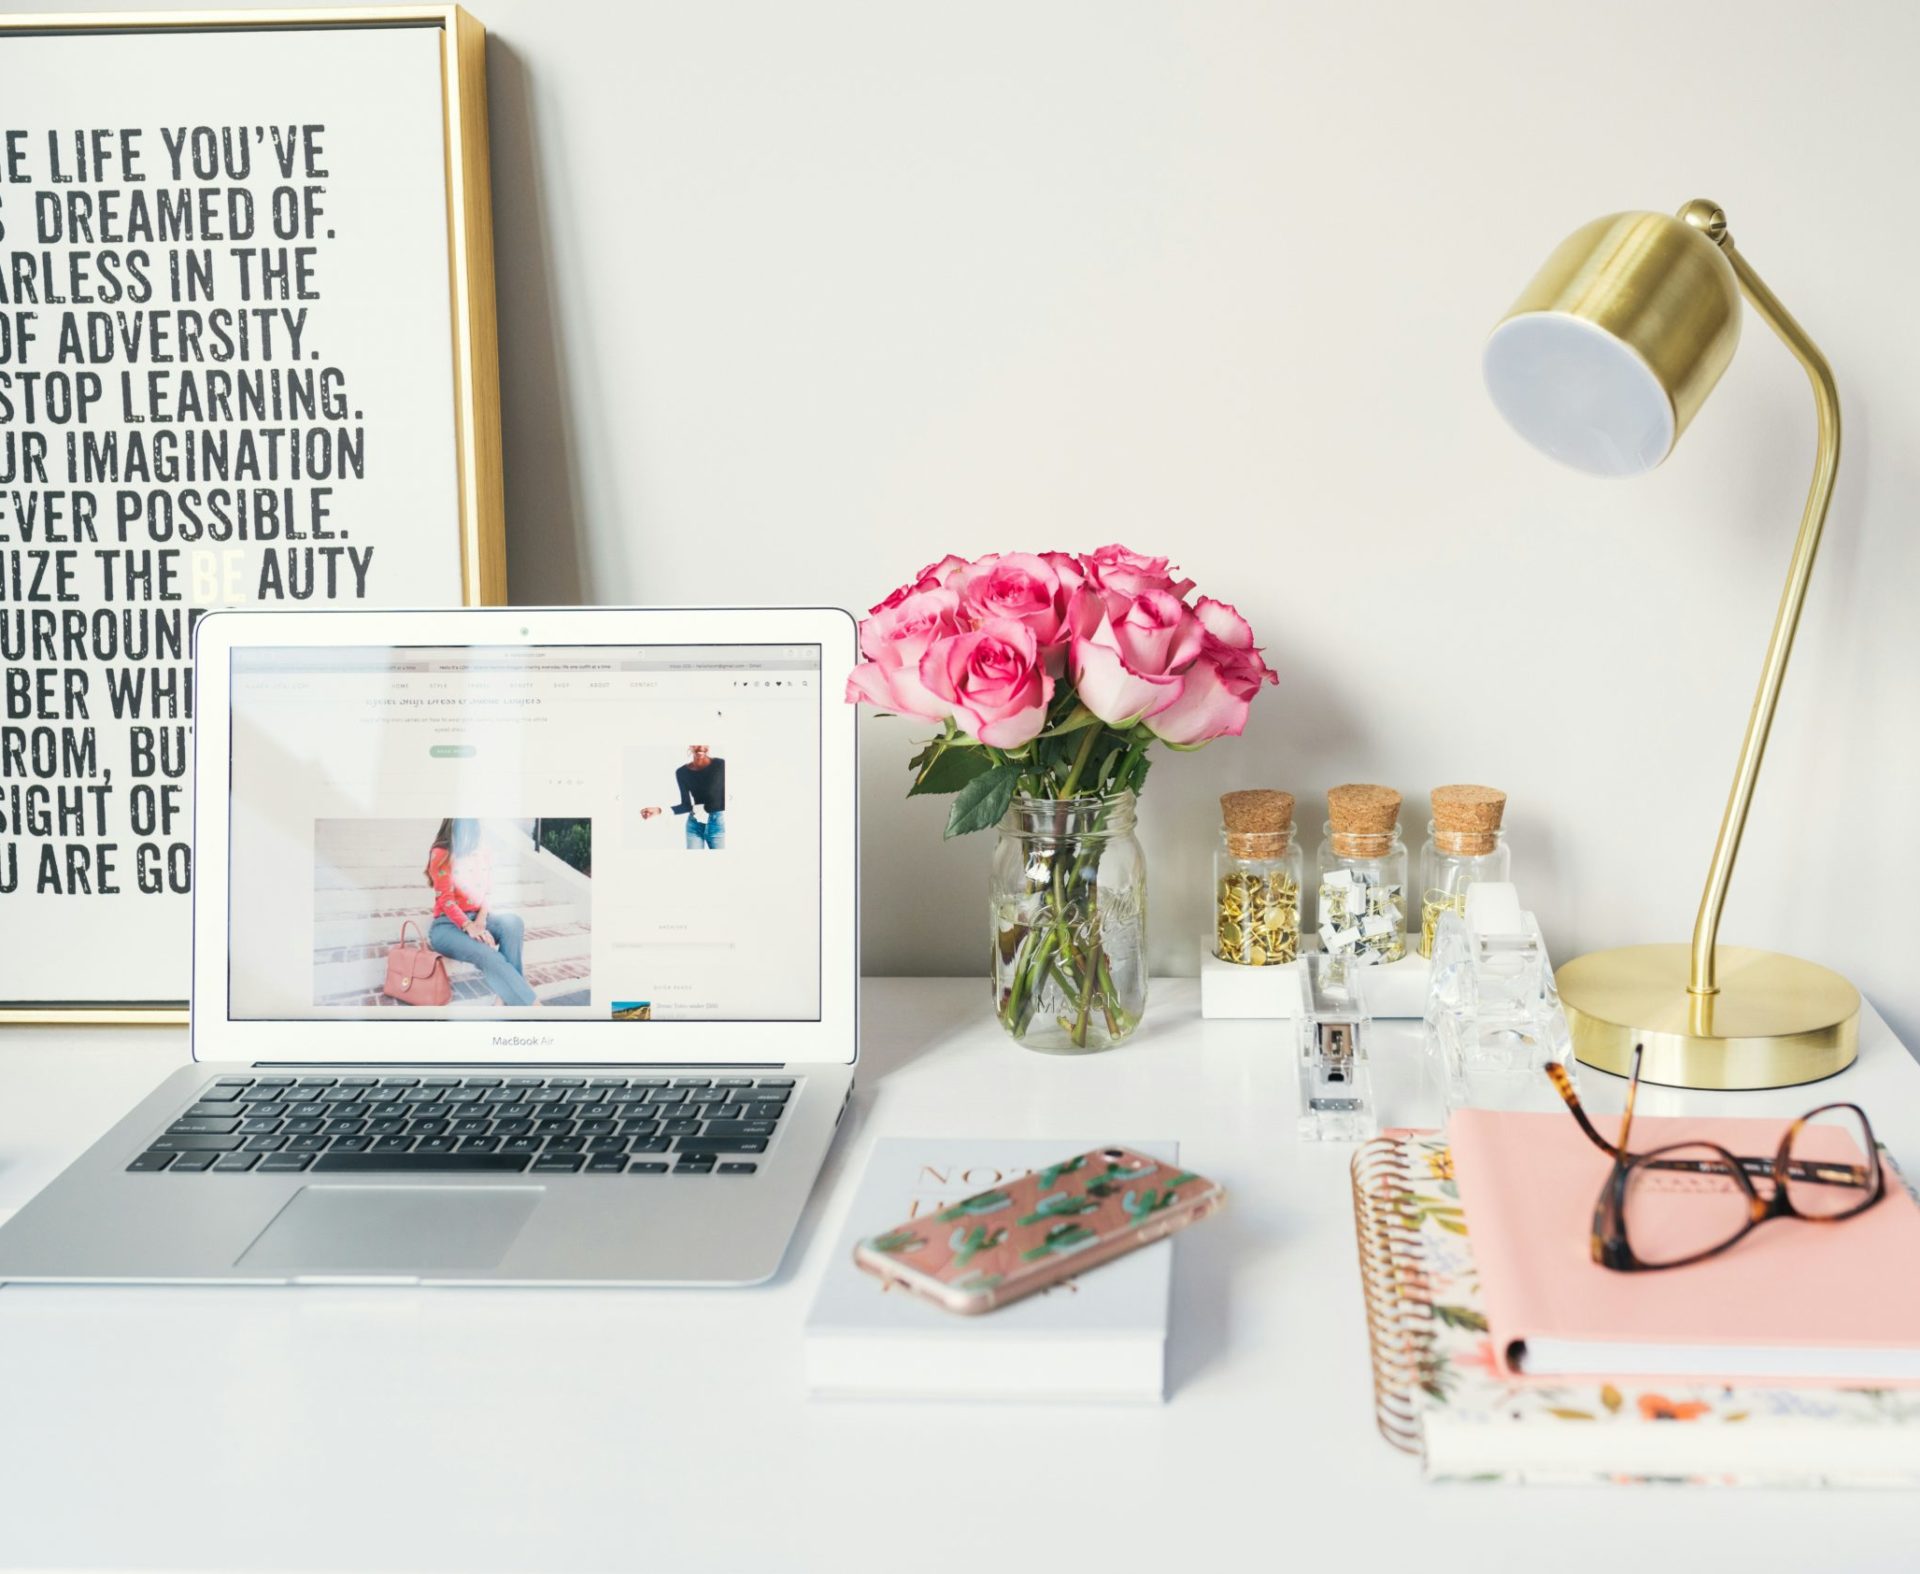 A photo of a clean white desk with a laptop sat on top of it. To the right side are some pink flowers in a small vase and a golden table lamp.